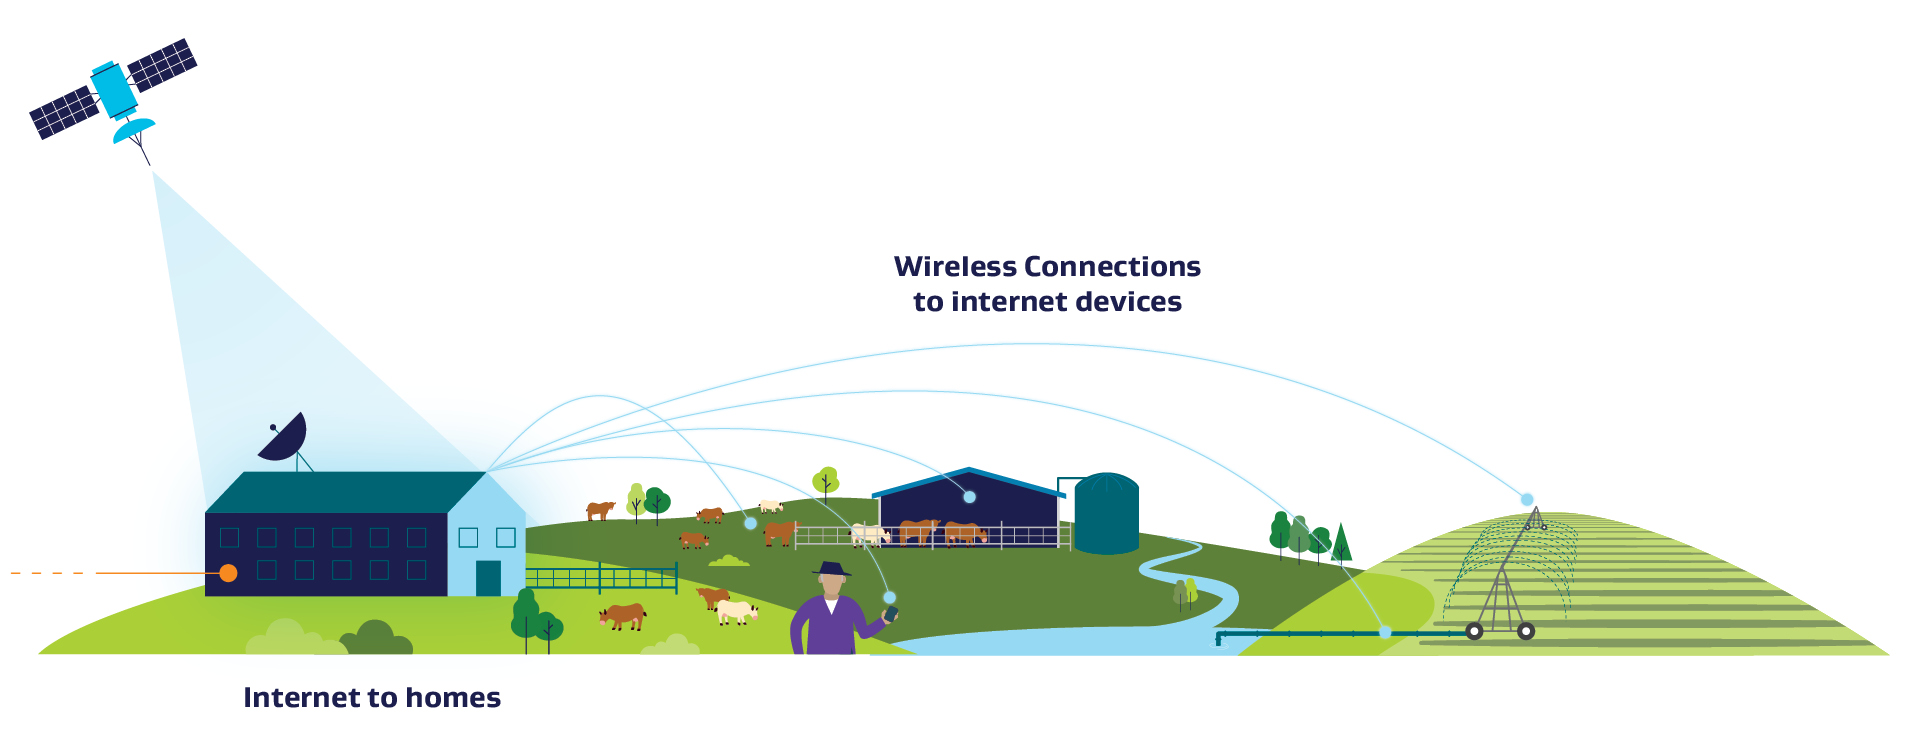 Countryside landscape, showing the different types of connectivity available to rural areas, including Satellite devices. 